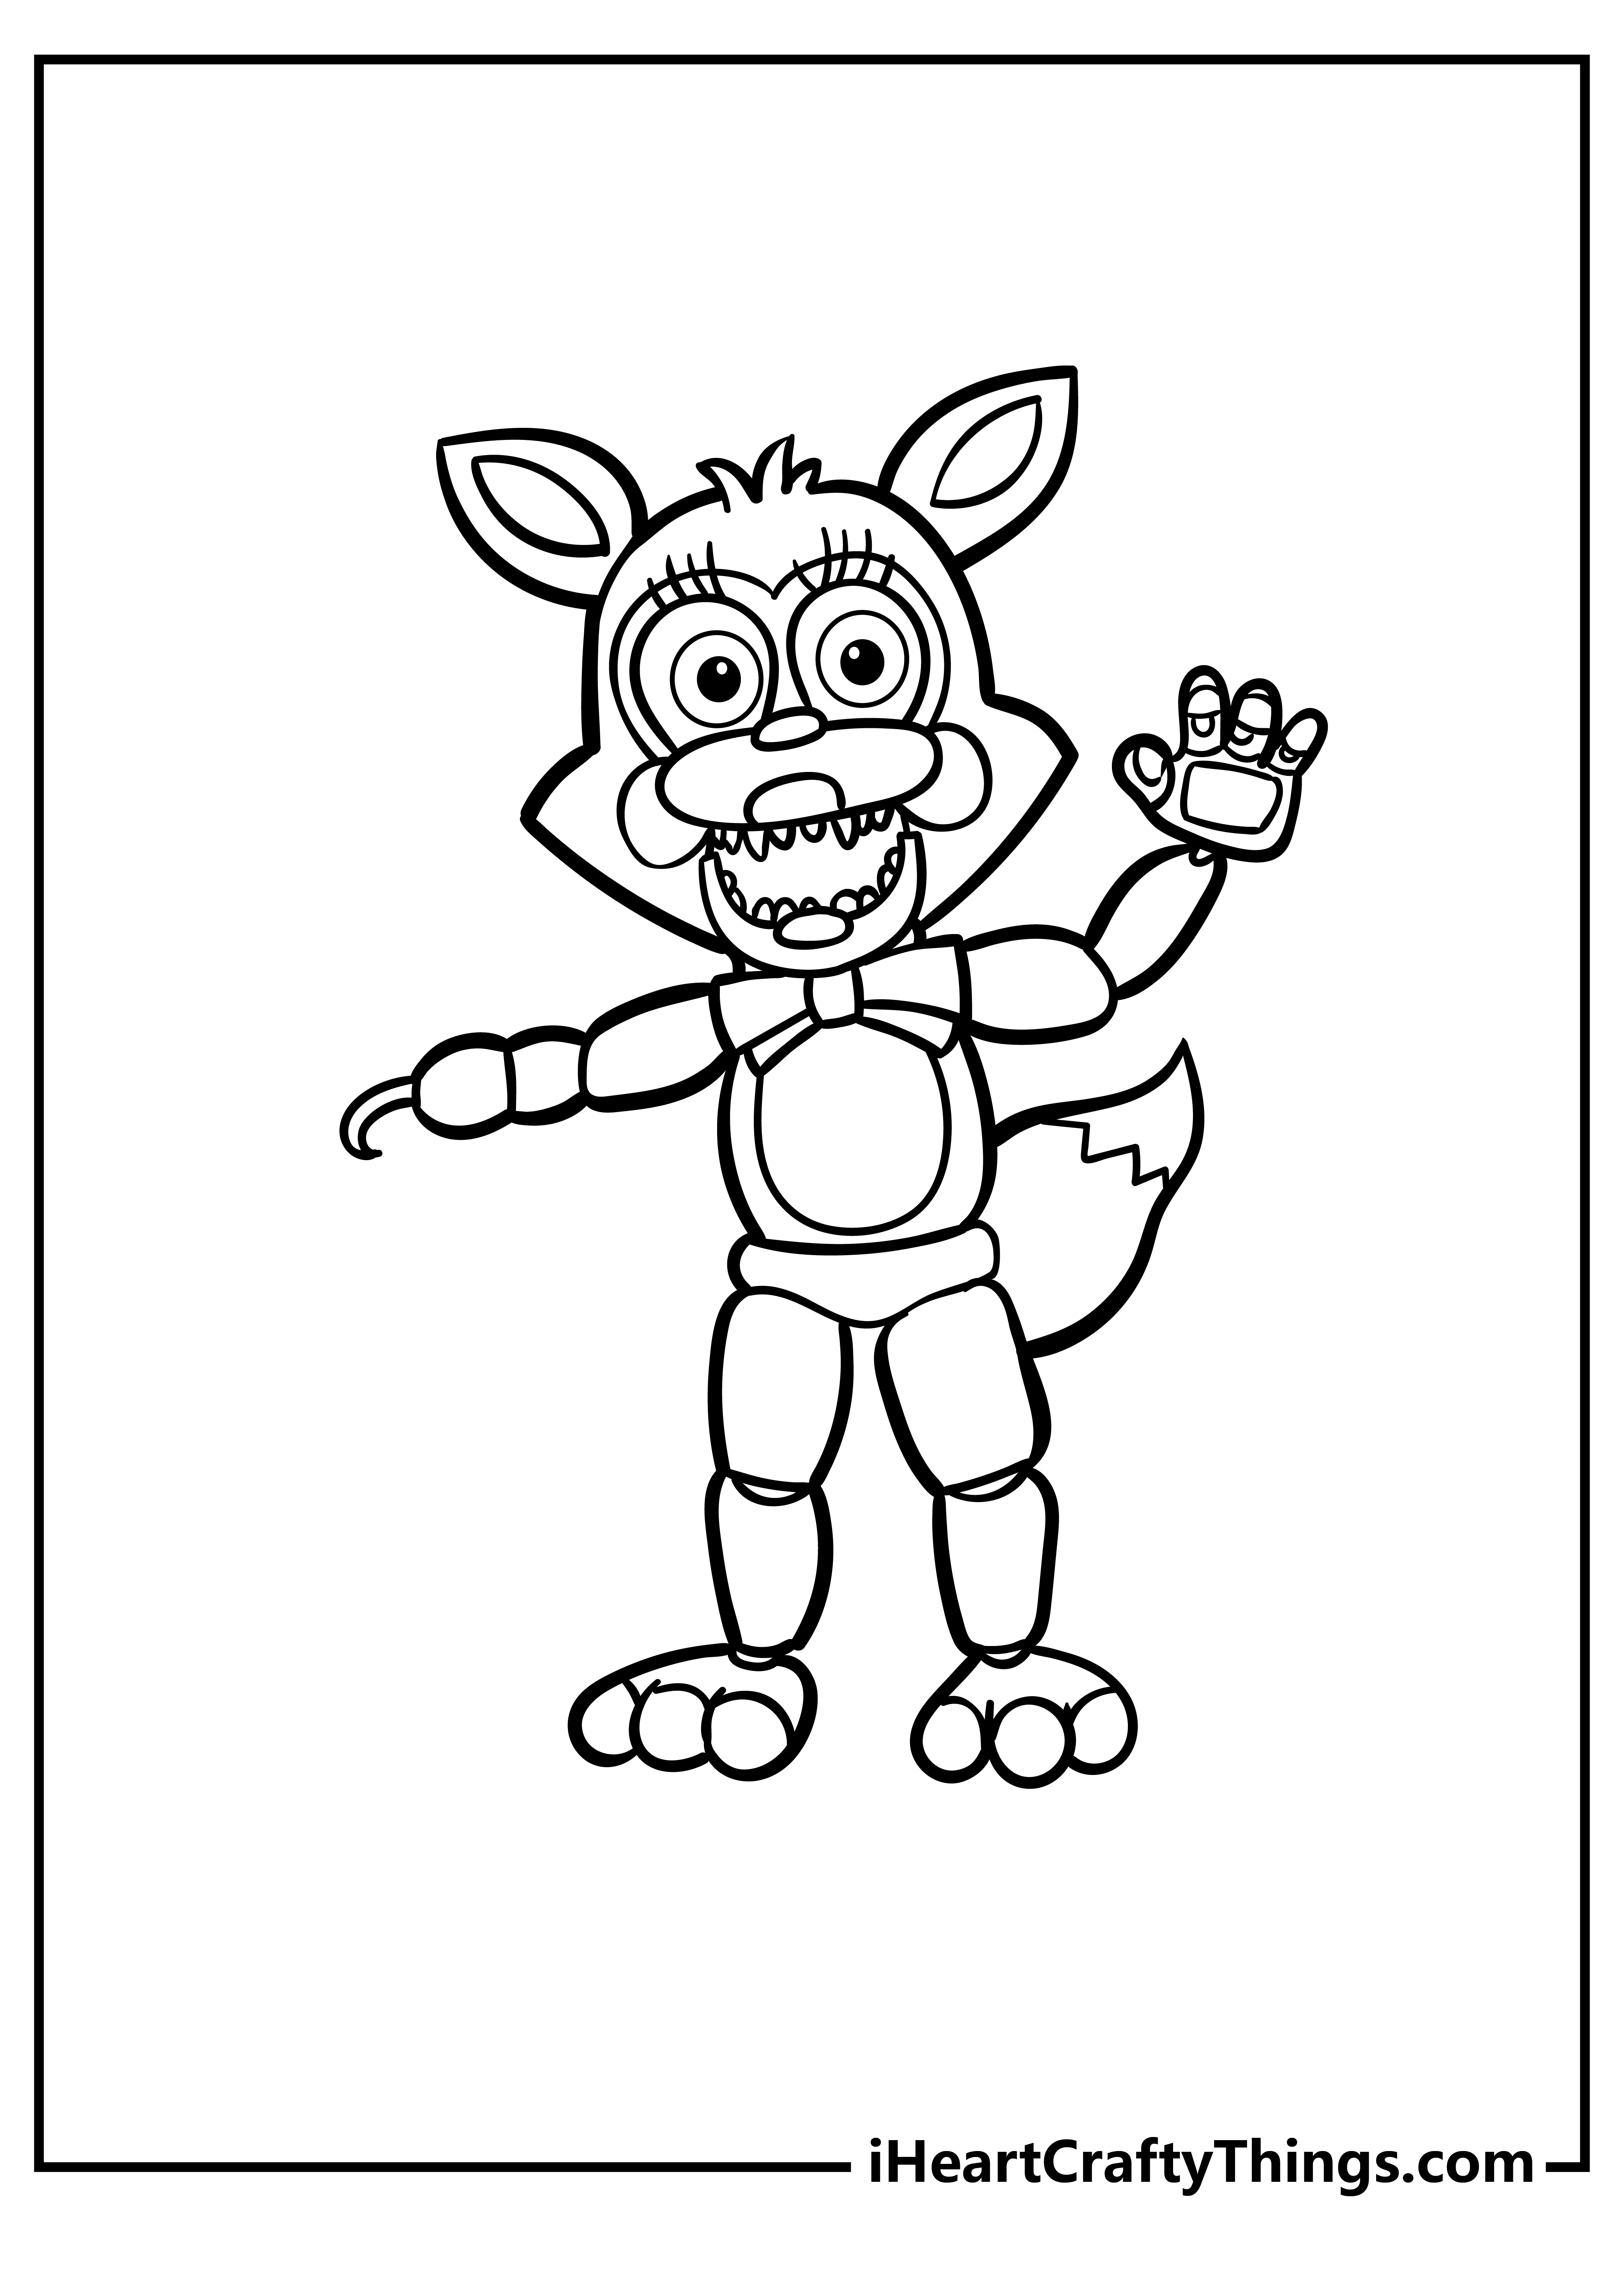 Five Nights At Freddy’s Coloring Pages for adults free printable